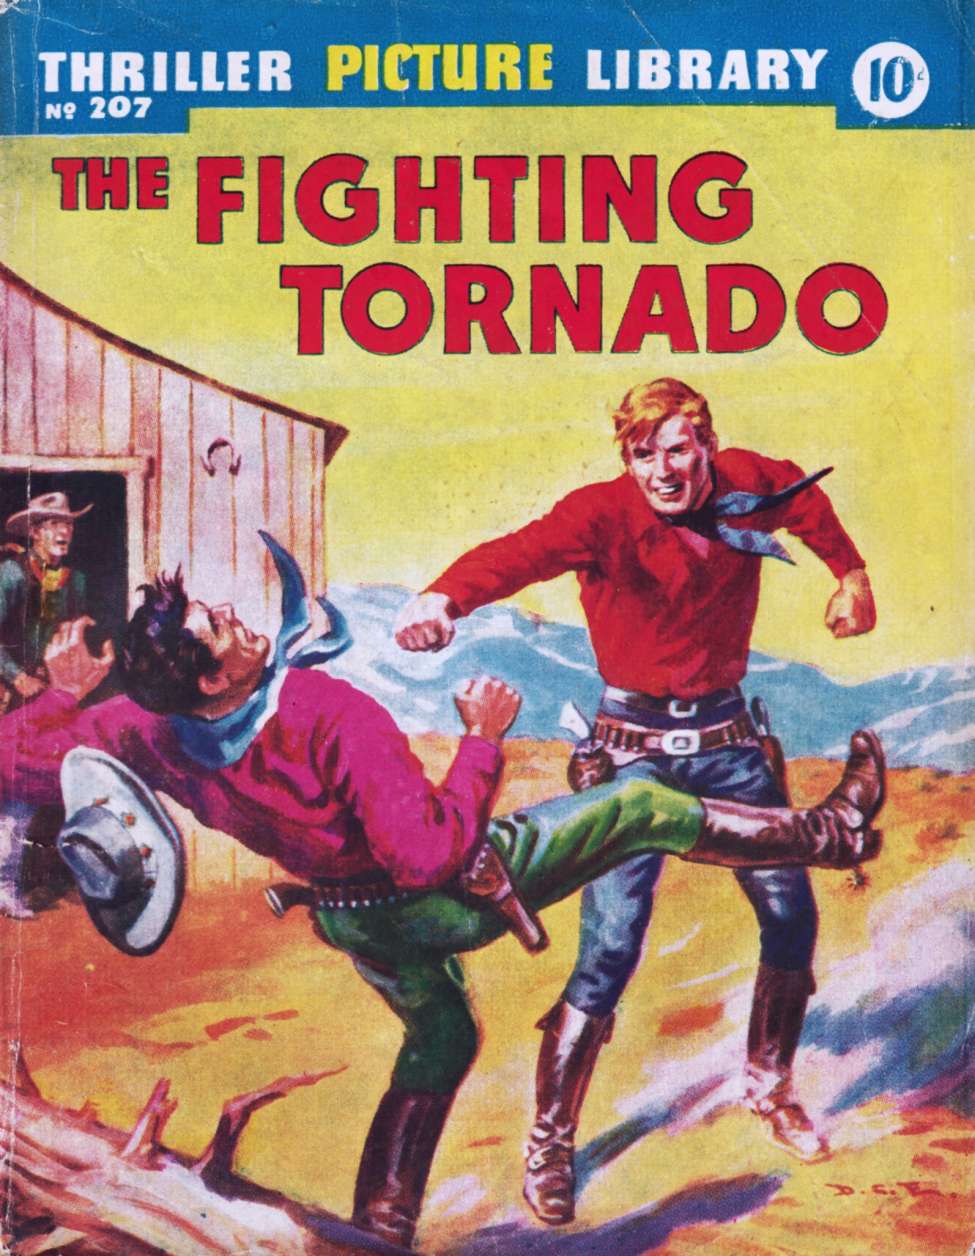 Book Cover For Thriller Picture Library 207 - The Fighting Tornado